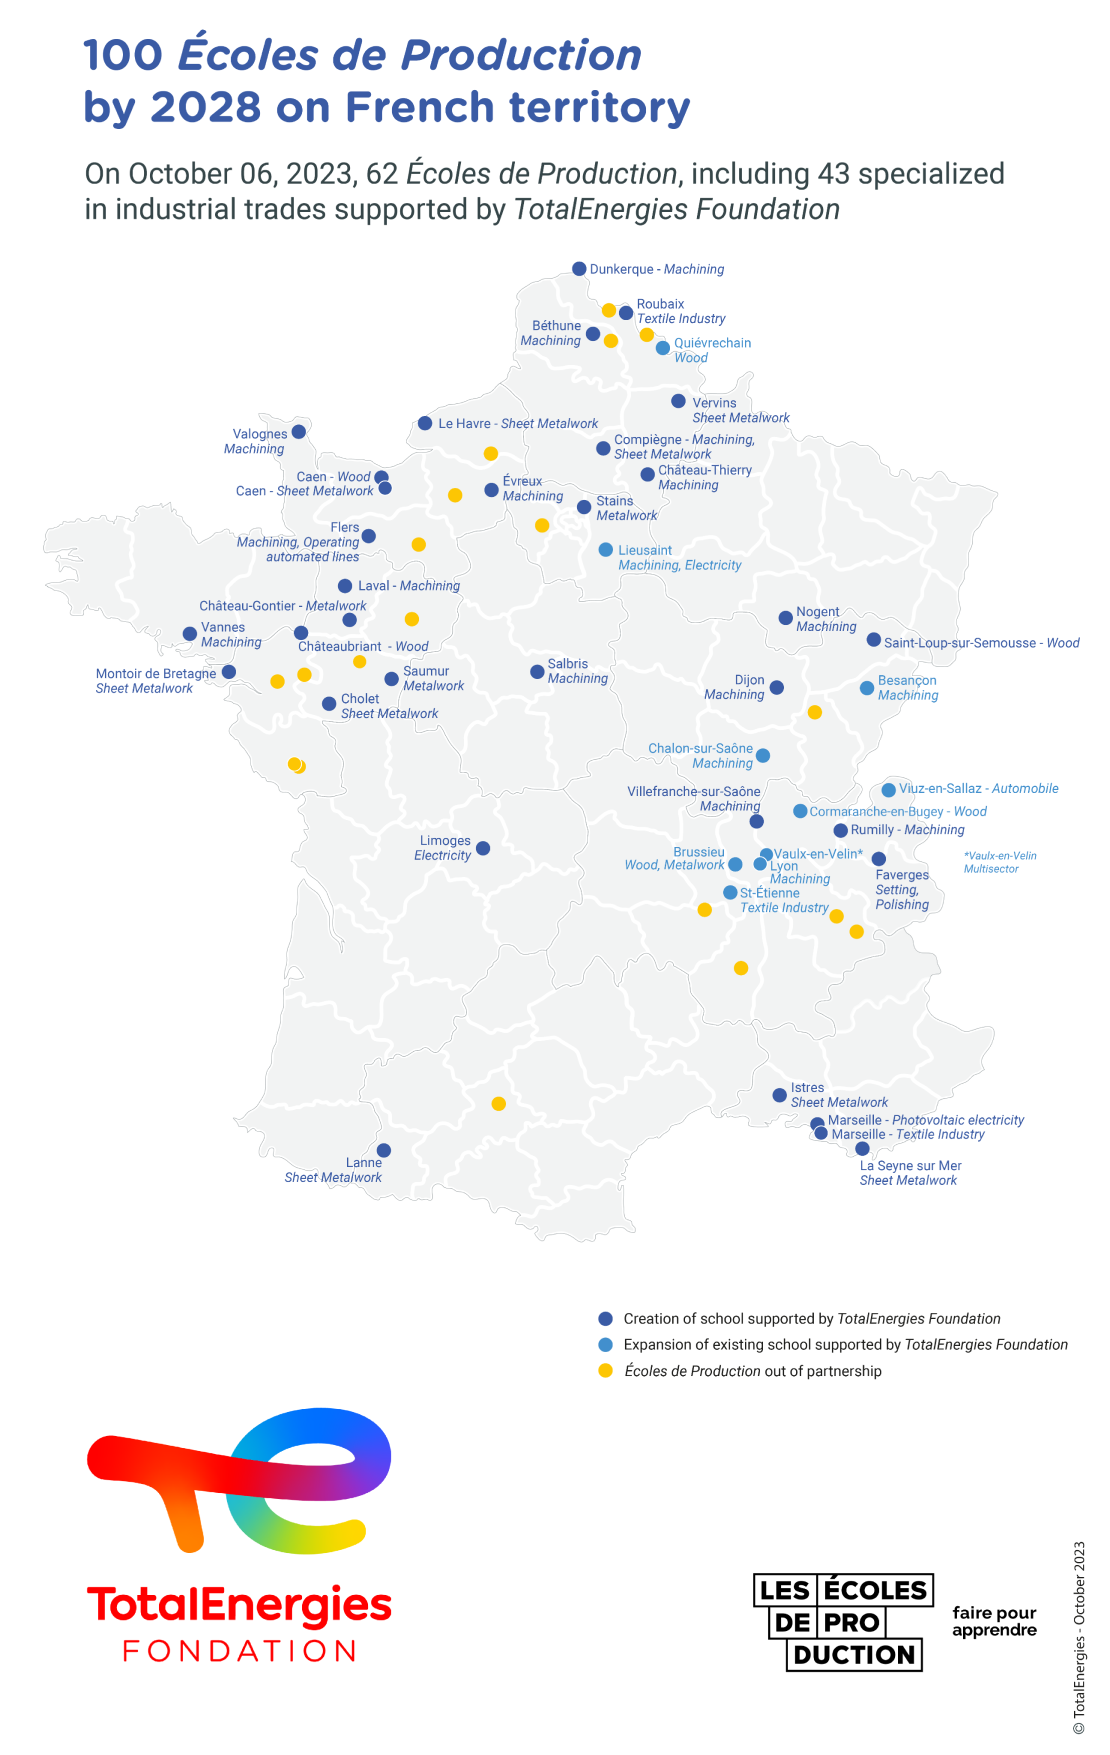 Map "100 Écoles de production by 2028 on French territory" - See detailed description hereafter